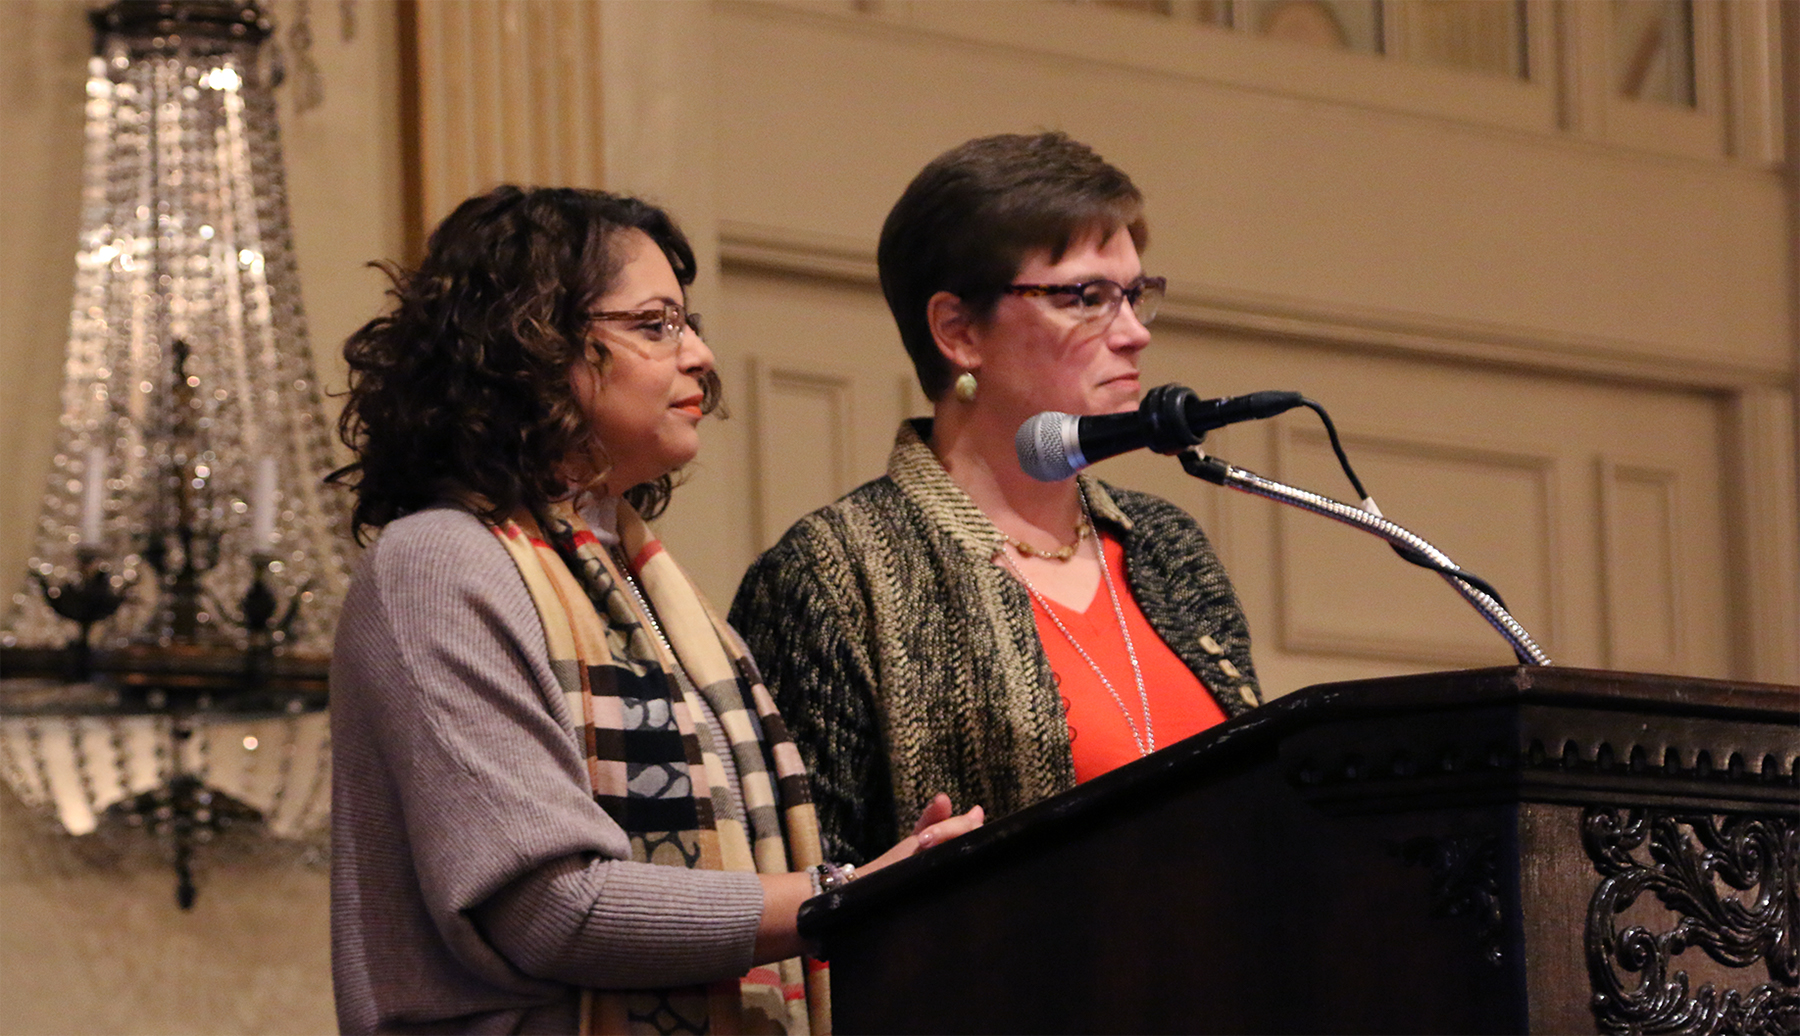 Elder Vilmarie Cintron-Olivieri and the Rev. Cindy Kohlmann, Co-Moderators of the 223rd General Assembly announce their decision to change books for their book study program at the Moderators’ Conference in Louisville, Kentucky. Photo by Rick Jones.